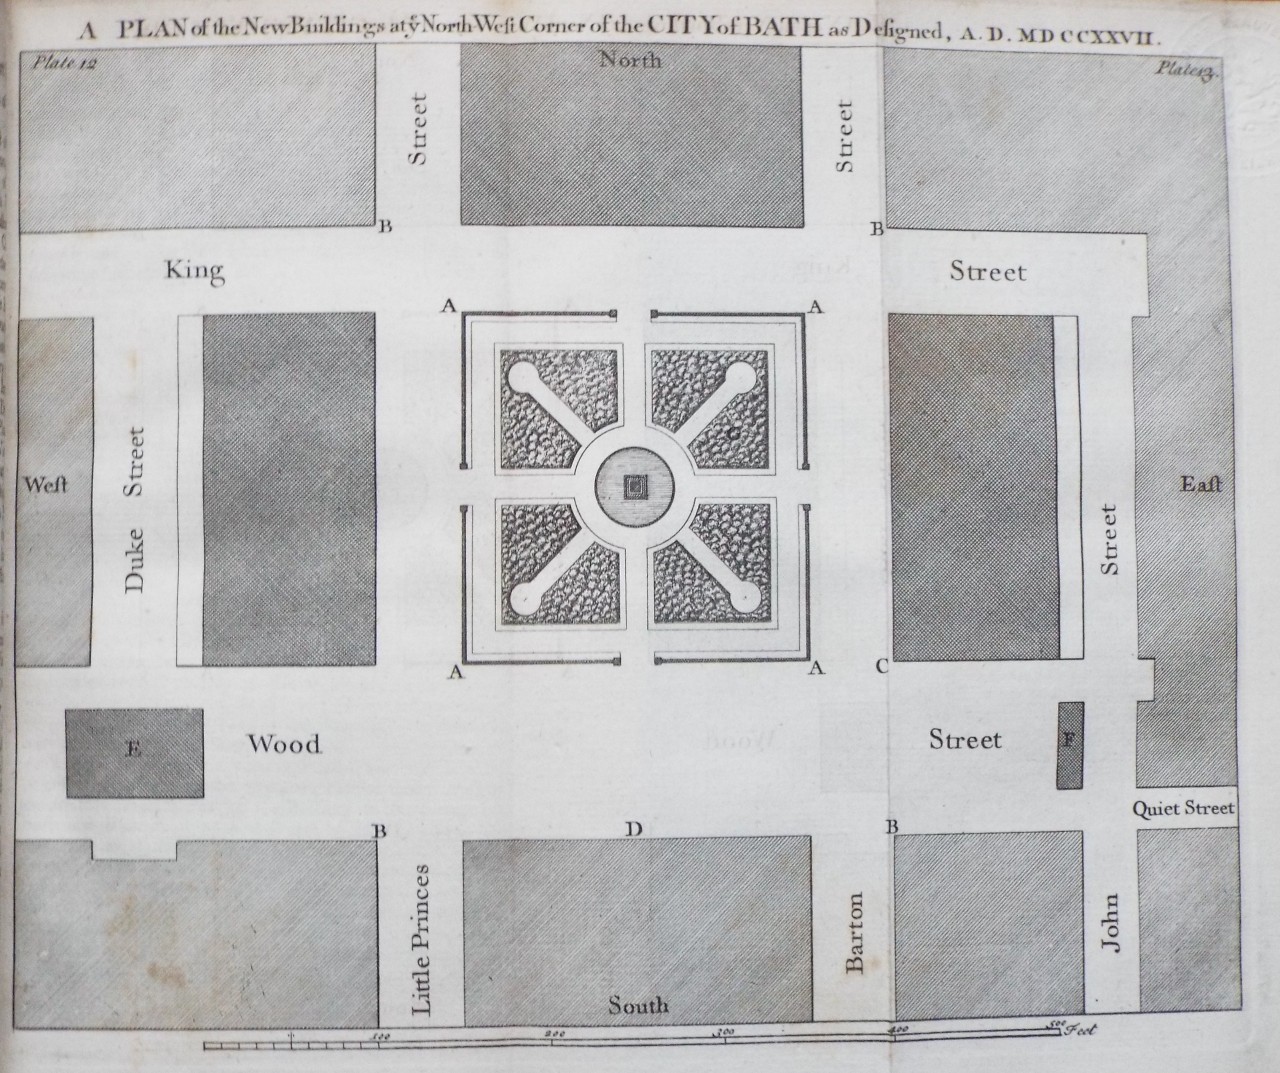 Print - A Plan of the New Buildings at ye North West Corner of the City of Bath as Designed, A. D. MDCCXXII.